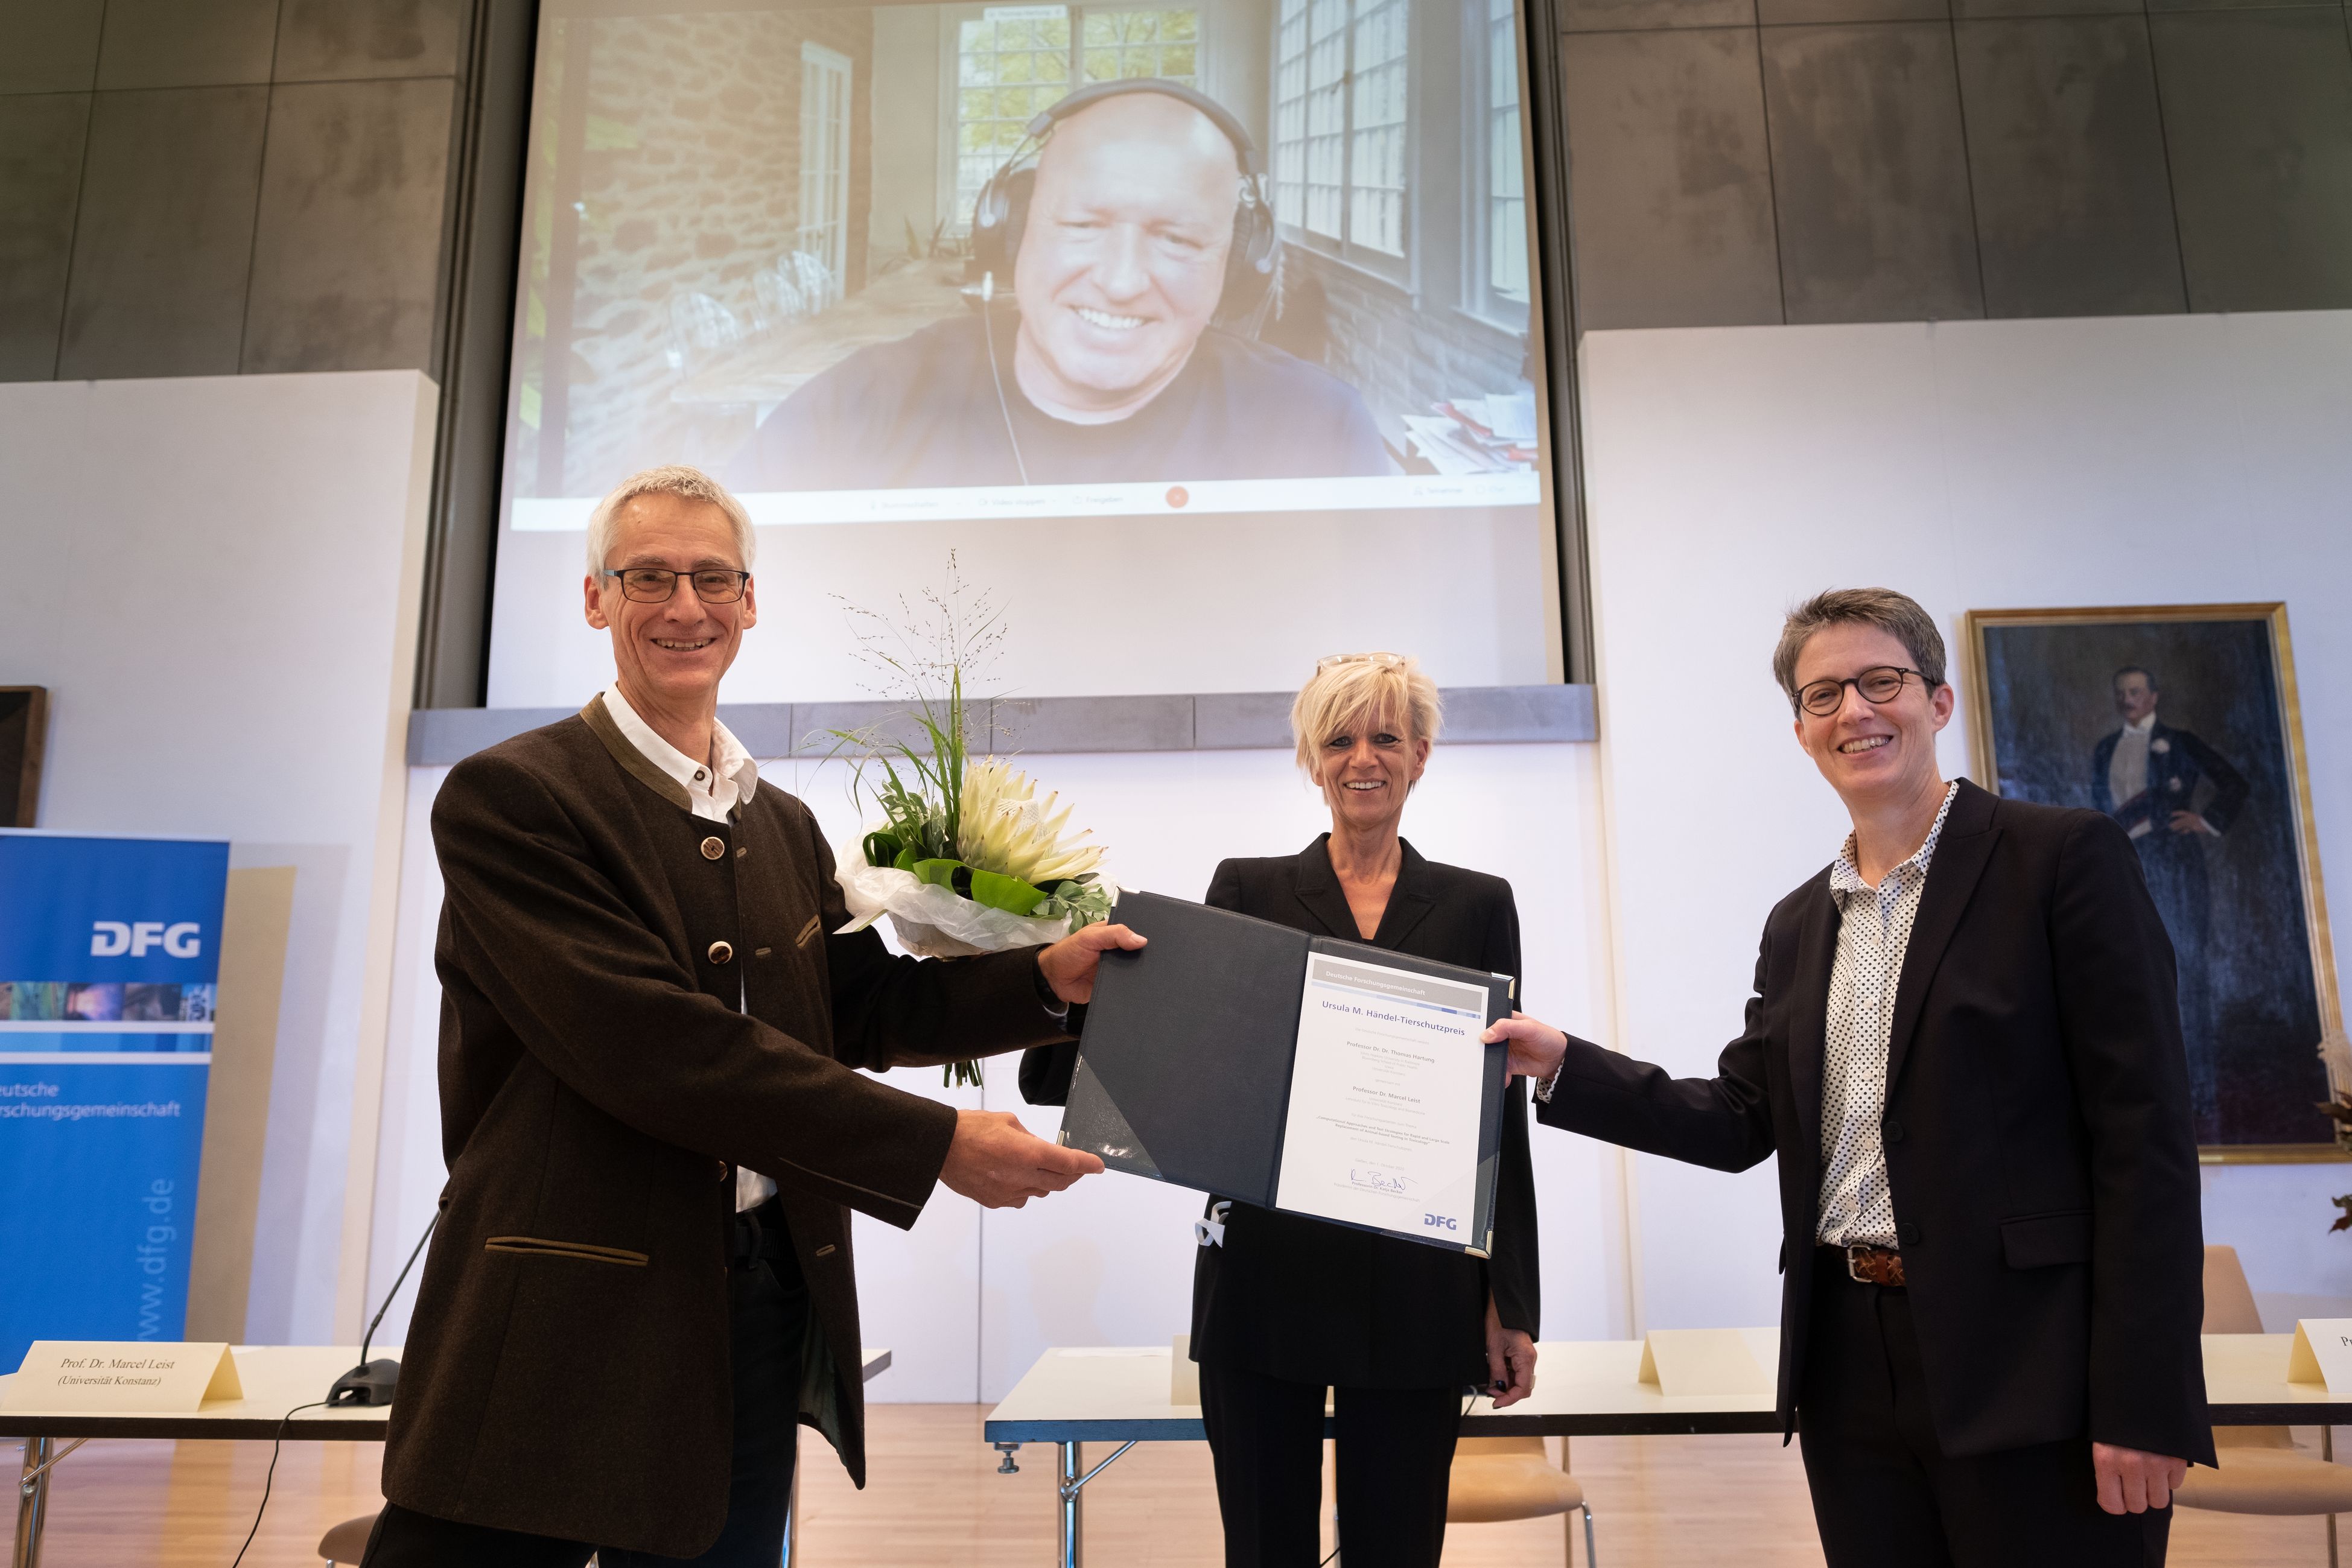 Prof. Marcel Leist and DFG Vice President Prof. Dr. Britta Siegmund holding  the Ursula M. Händel Animal Welfare Prize certificate of the German Research Foundation (DFG). Also in the photo: Prof. Dr. Brigitte Vollmar, chair of the Senate Commission on Animal Protection and Experimentation (centre). Prof. Thomas Hartung can be seen on the TV screen in the background.